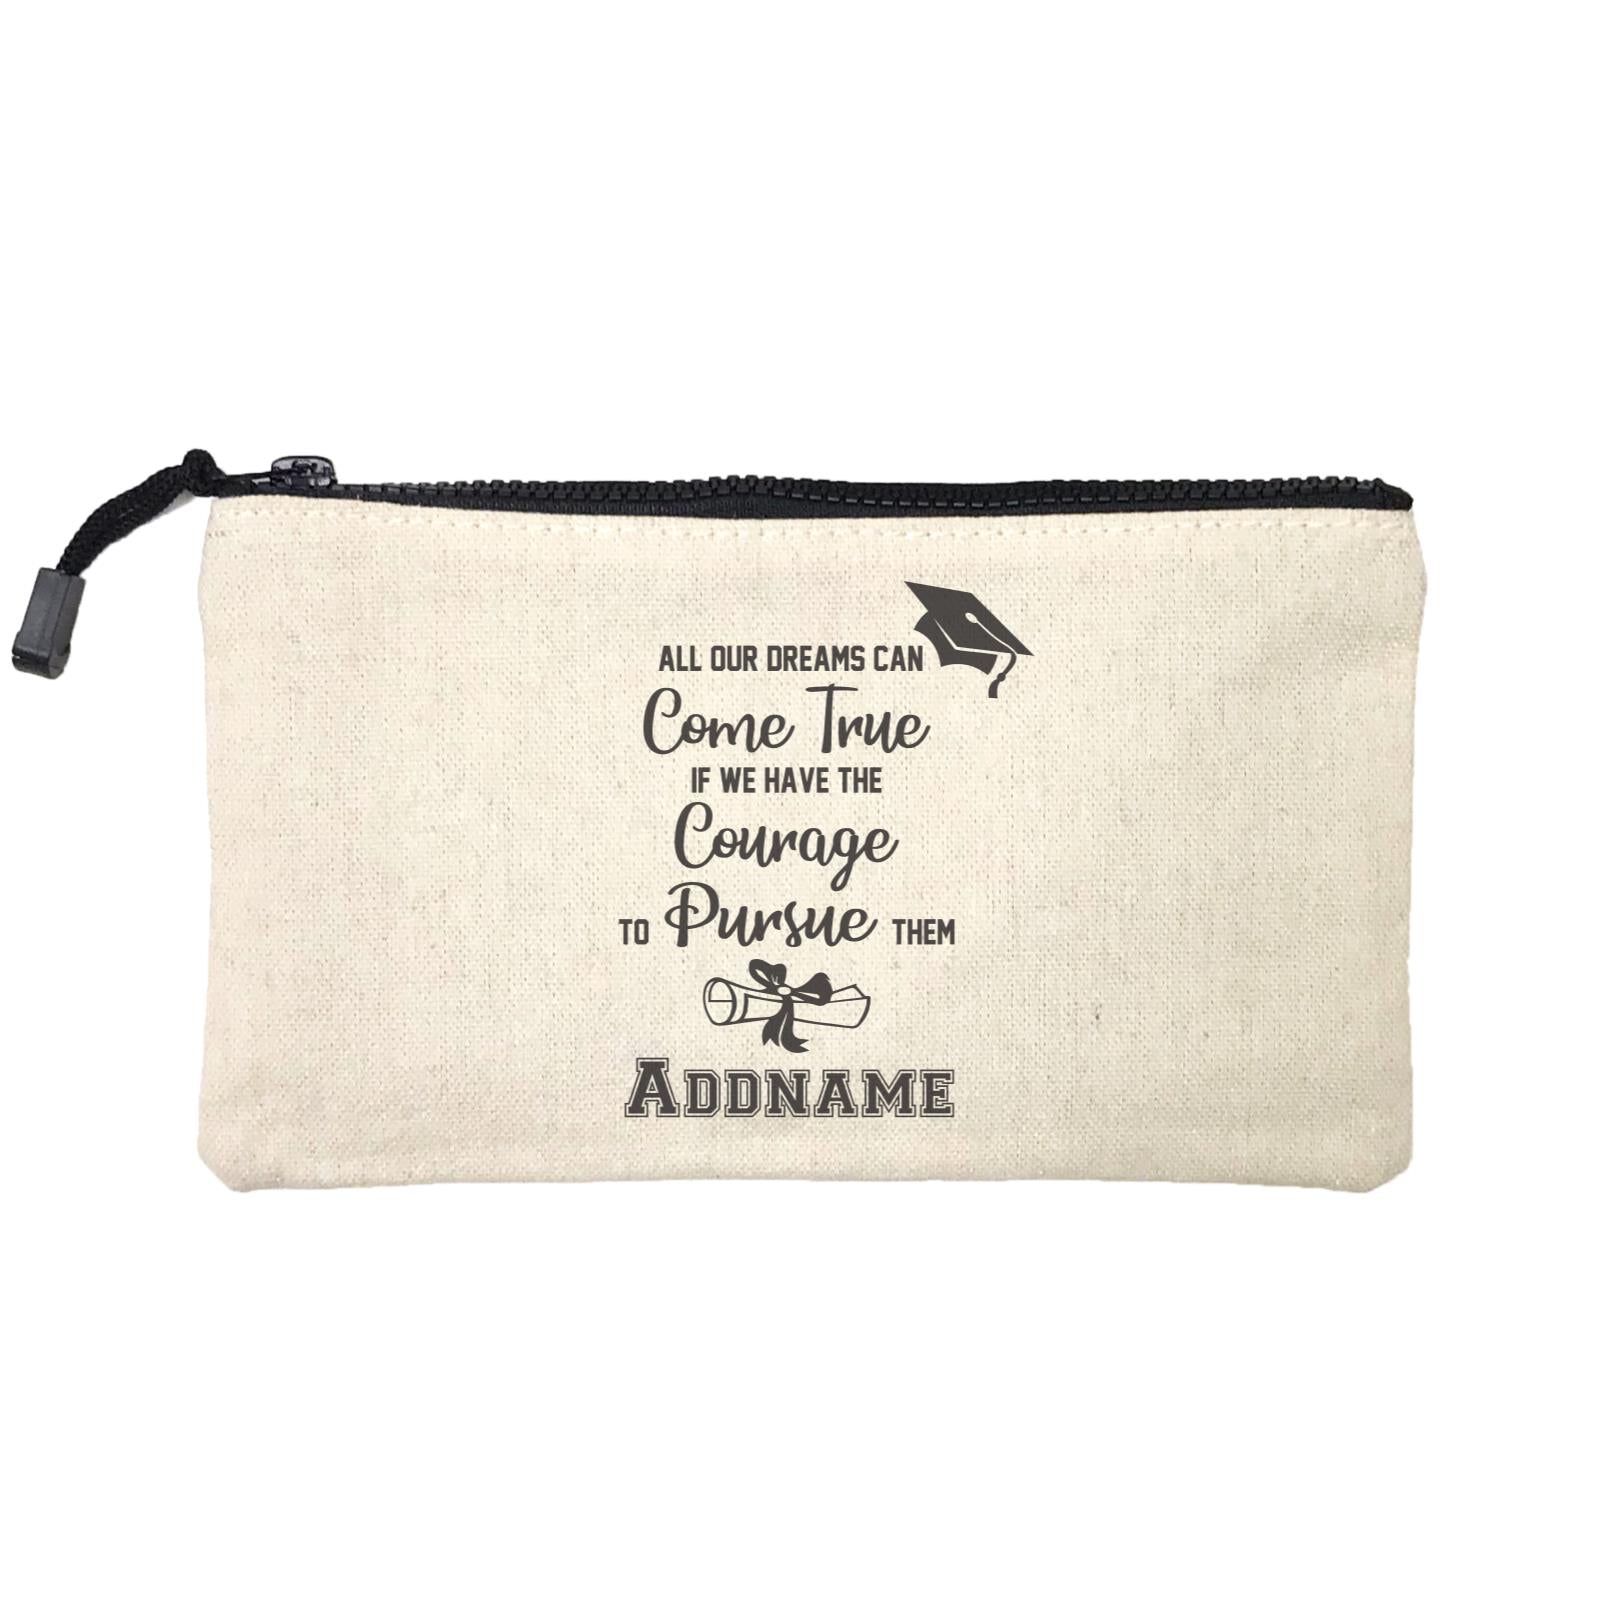 Graduation Series All Our Dreams Can Come True Mini Accessories Stationery Pouch